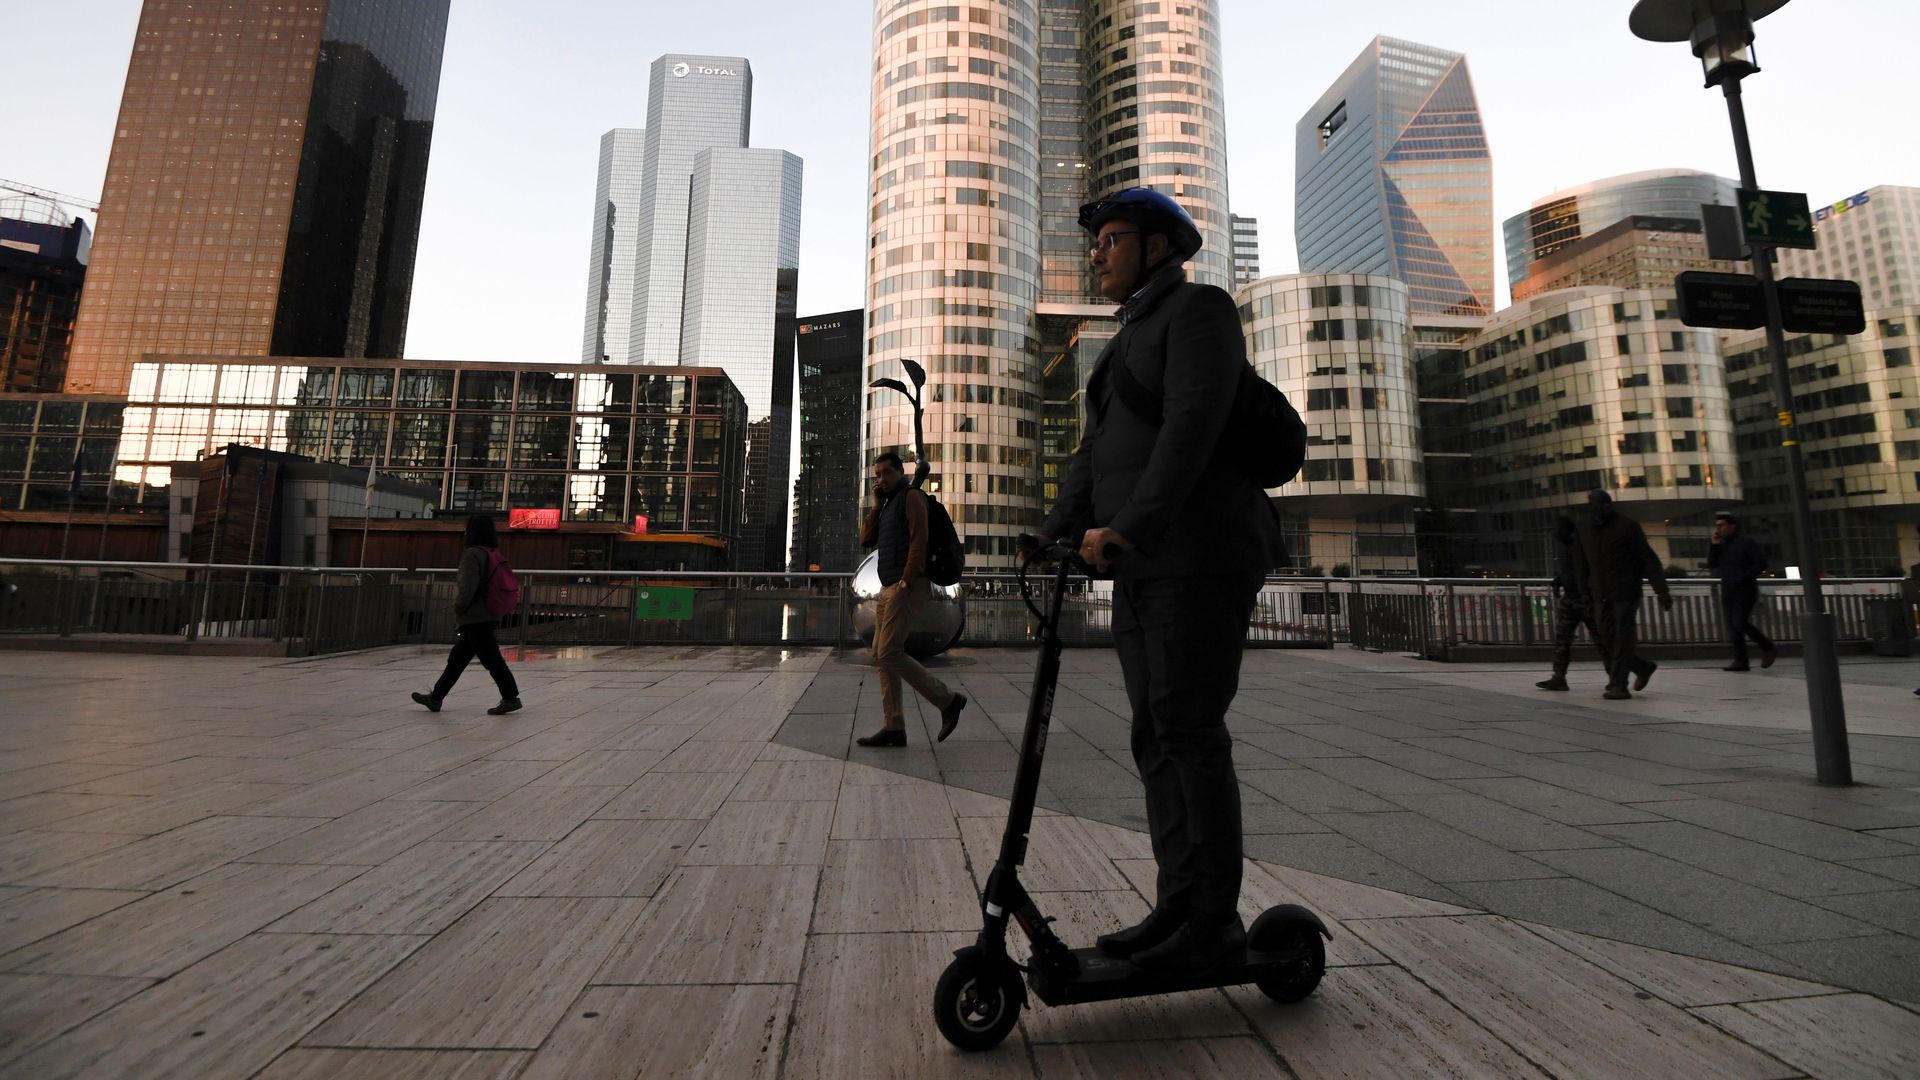 In this image, a person rides an electric scooter through a mostly empty city quad. Skyscrapers are in the background.